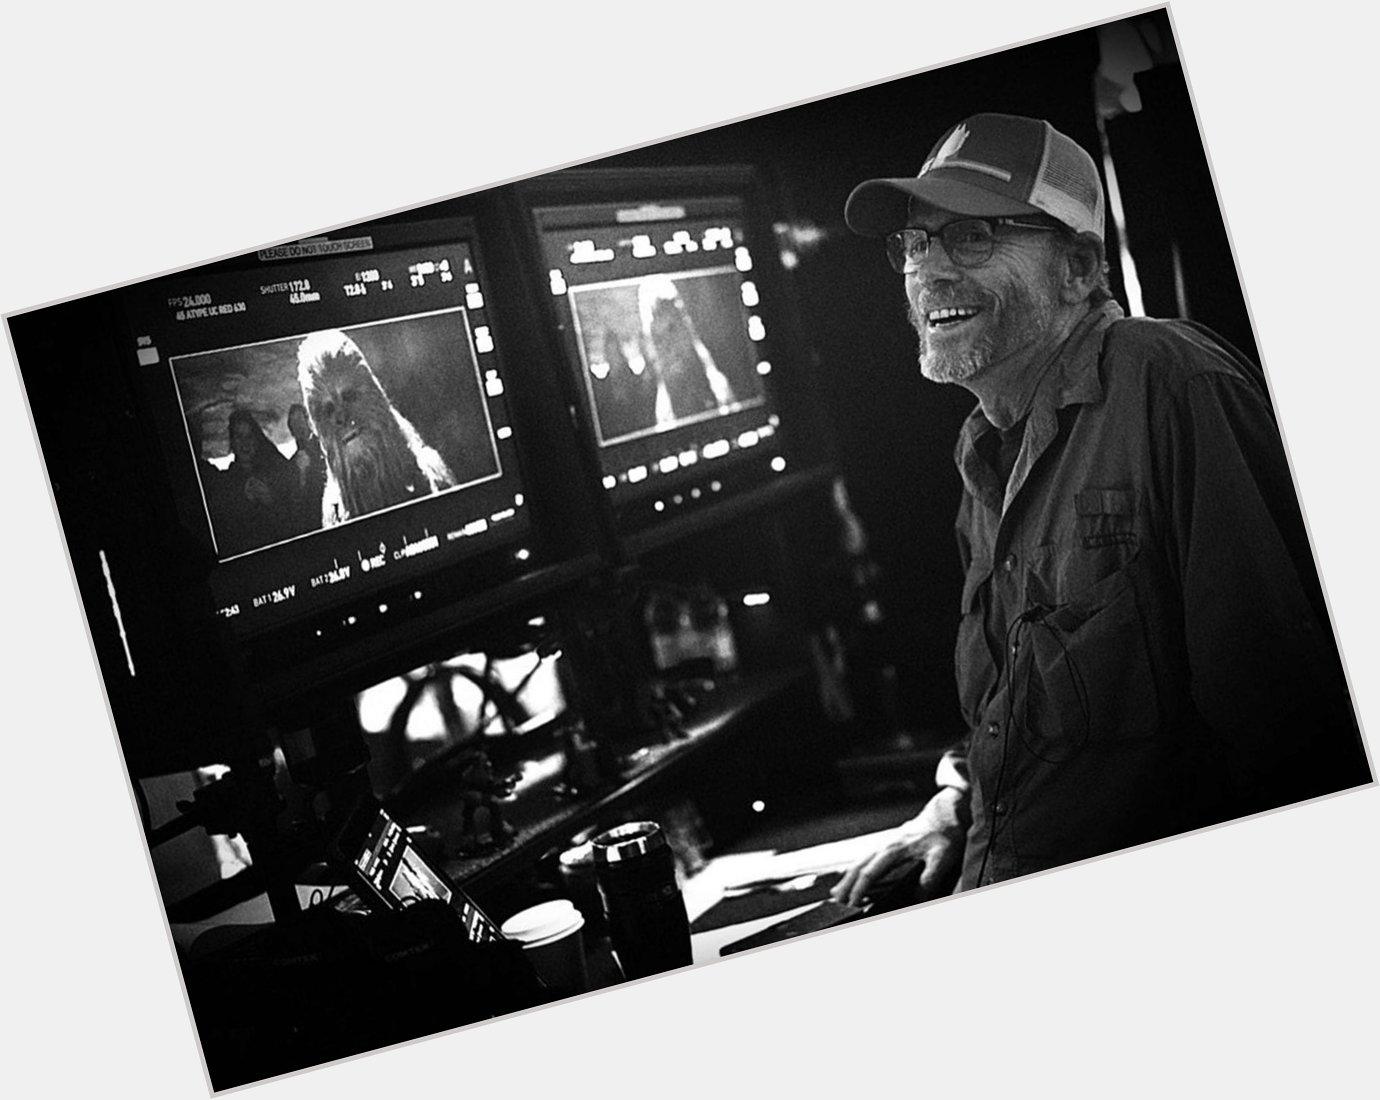 Happy birthday to Ron Howard who directed Solo: A Star Wars Story. 